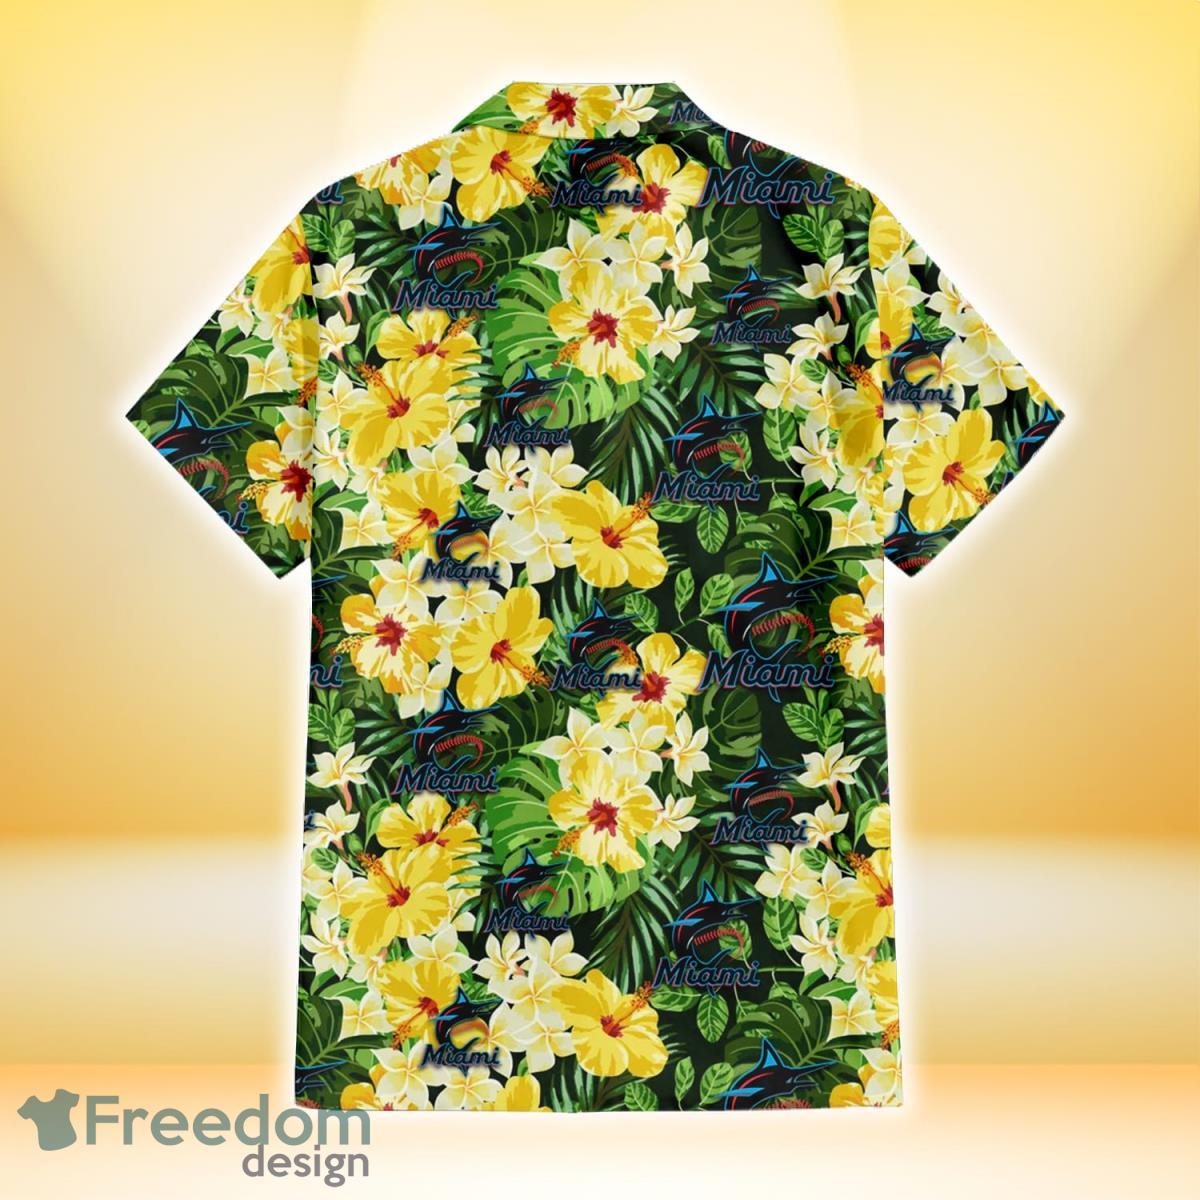 Boston Red Sox Logo And Yellow Flower Tropical Hawaiian Shirt For Fans -  Freedomdesign